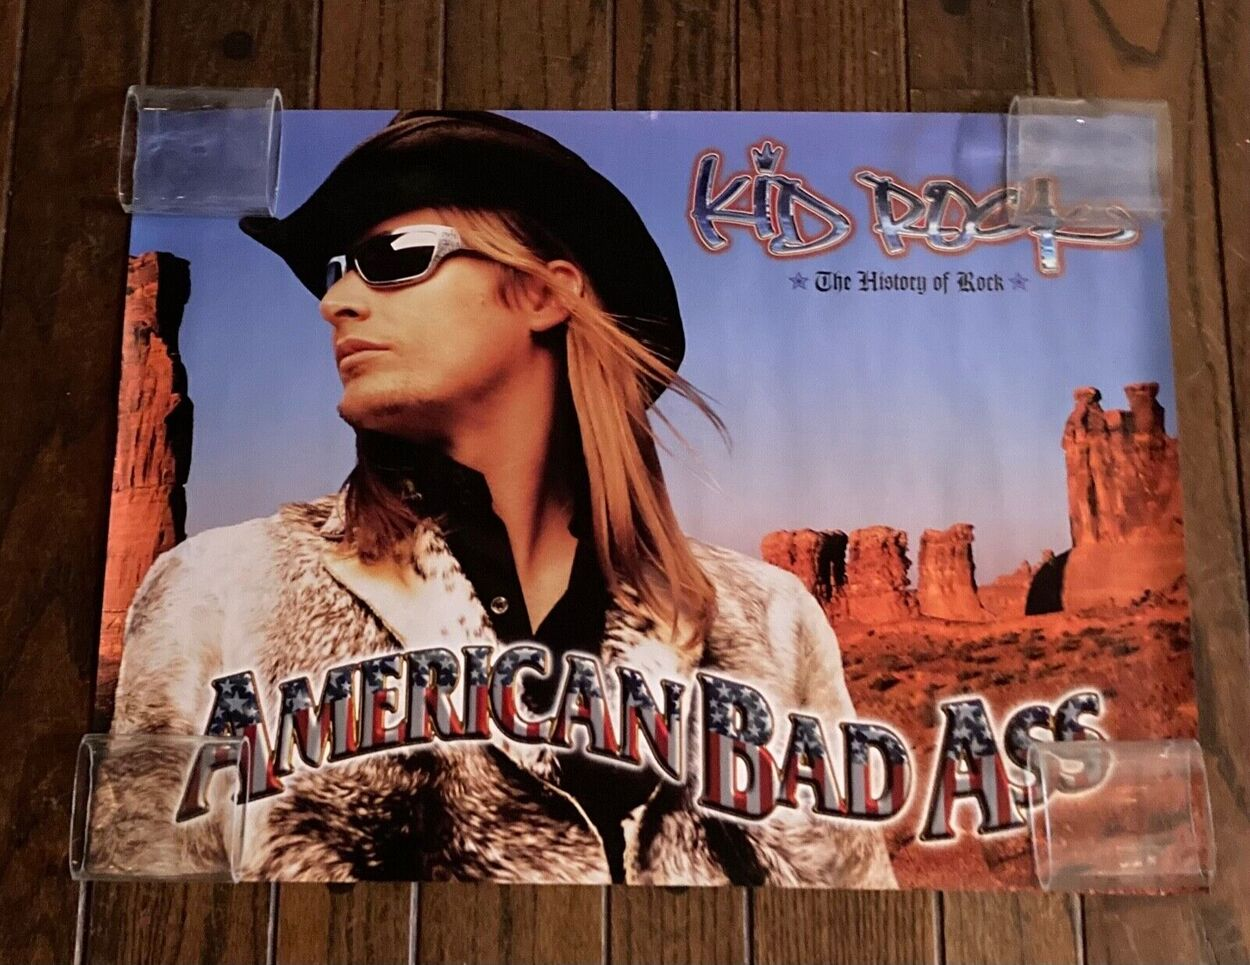 Kid Rock The History Of Rock American Bad Ass.